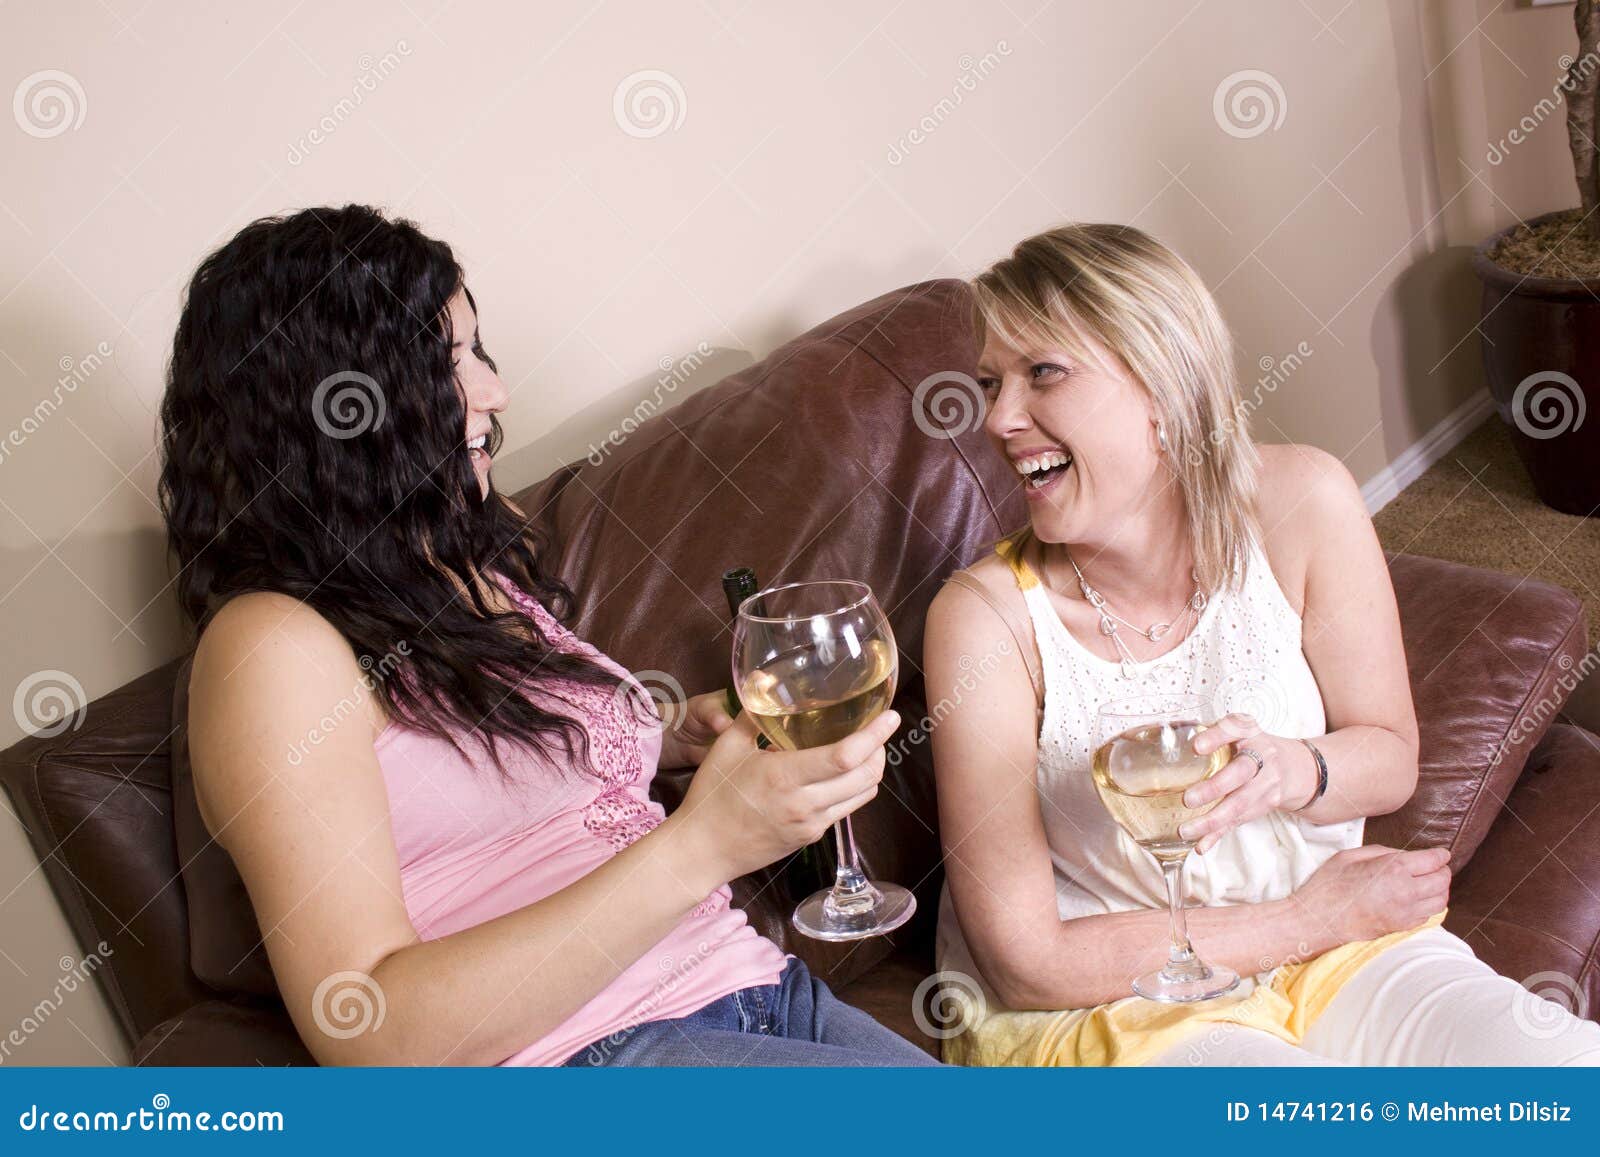 Friends Socializing at Home Stock Photo - Image of drinking, chat: 14741216